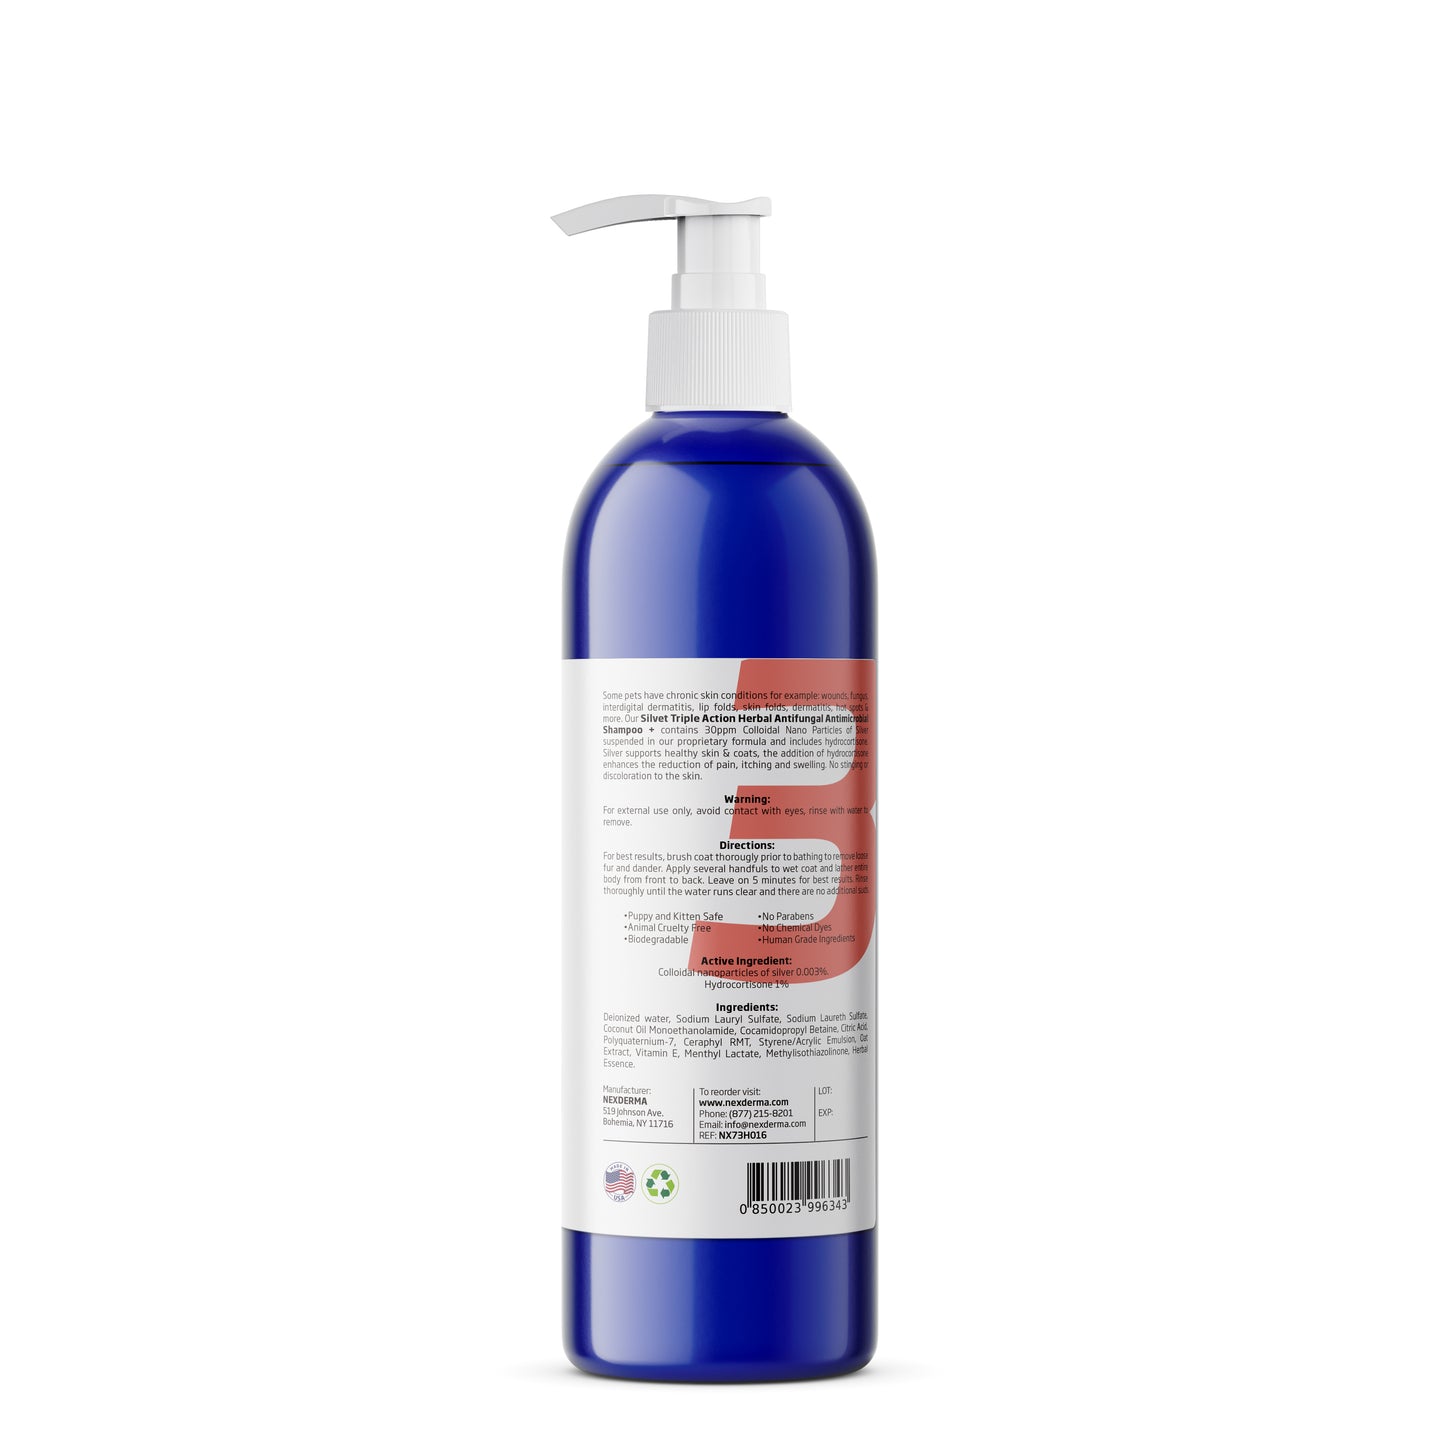 Silvet Antifungal Antimicrobial Herbal Shampoo Triple Action +